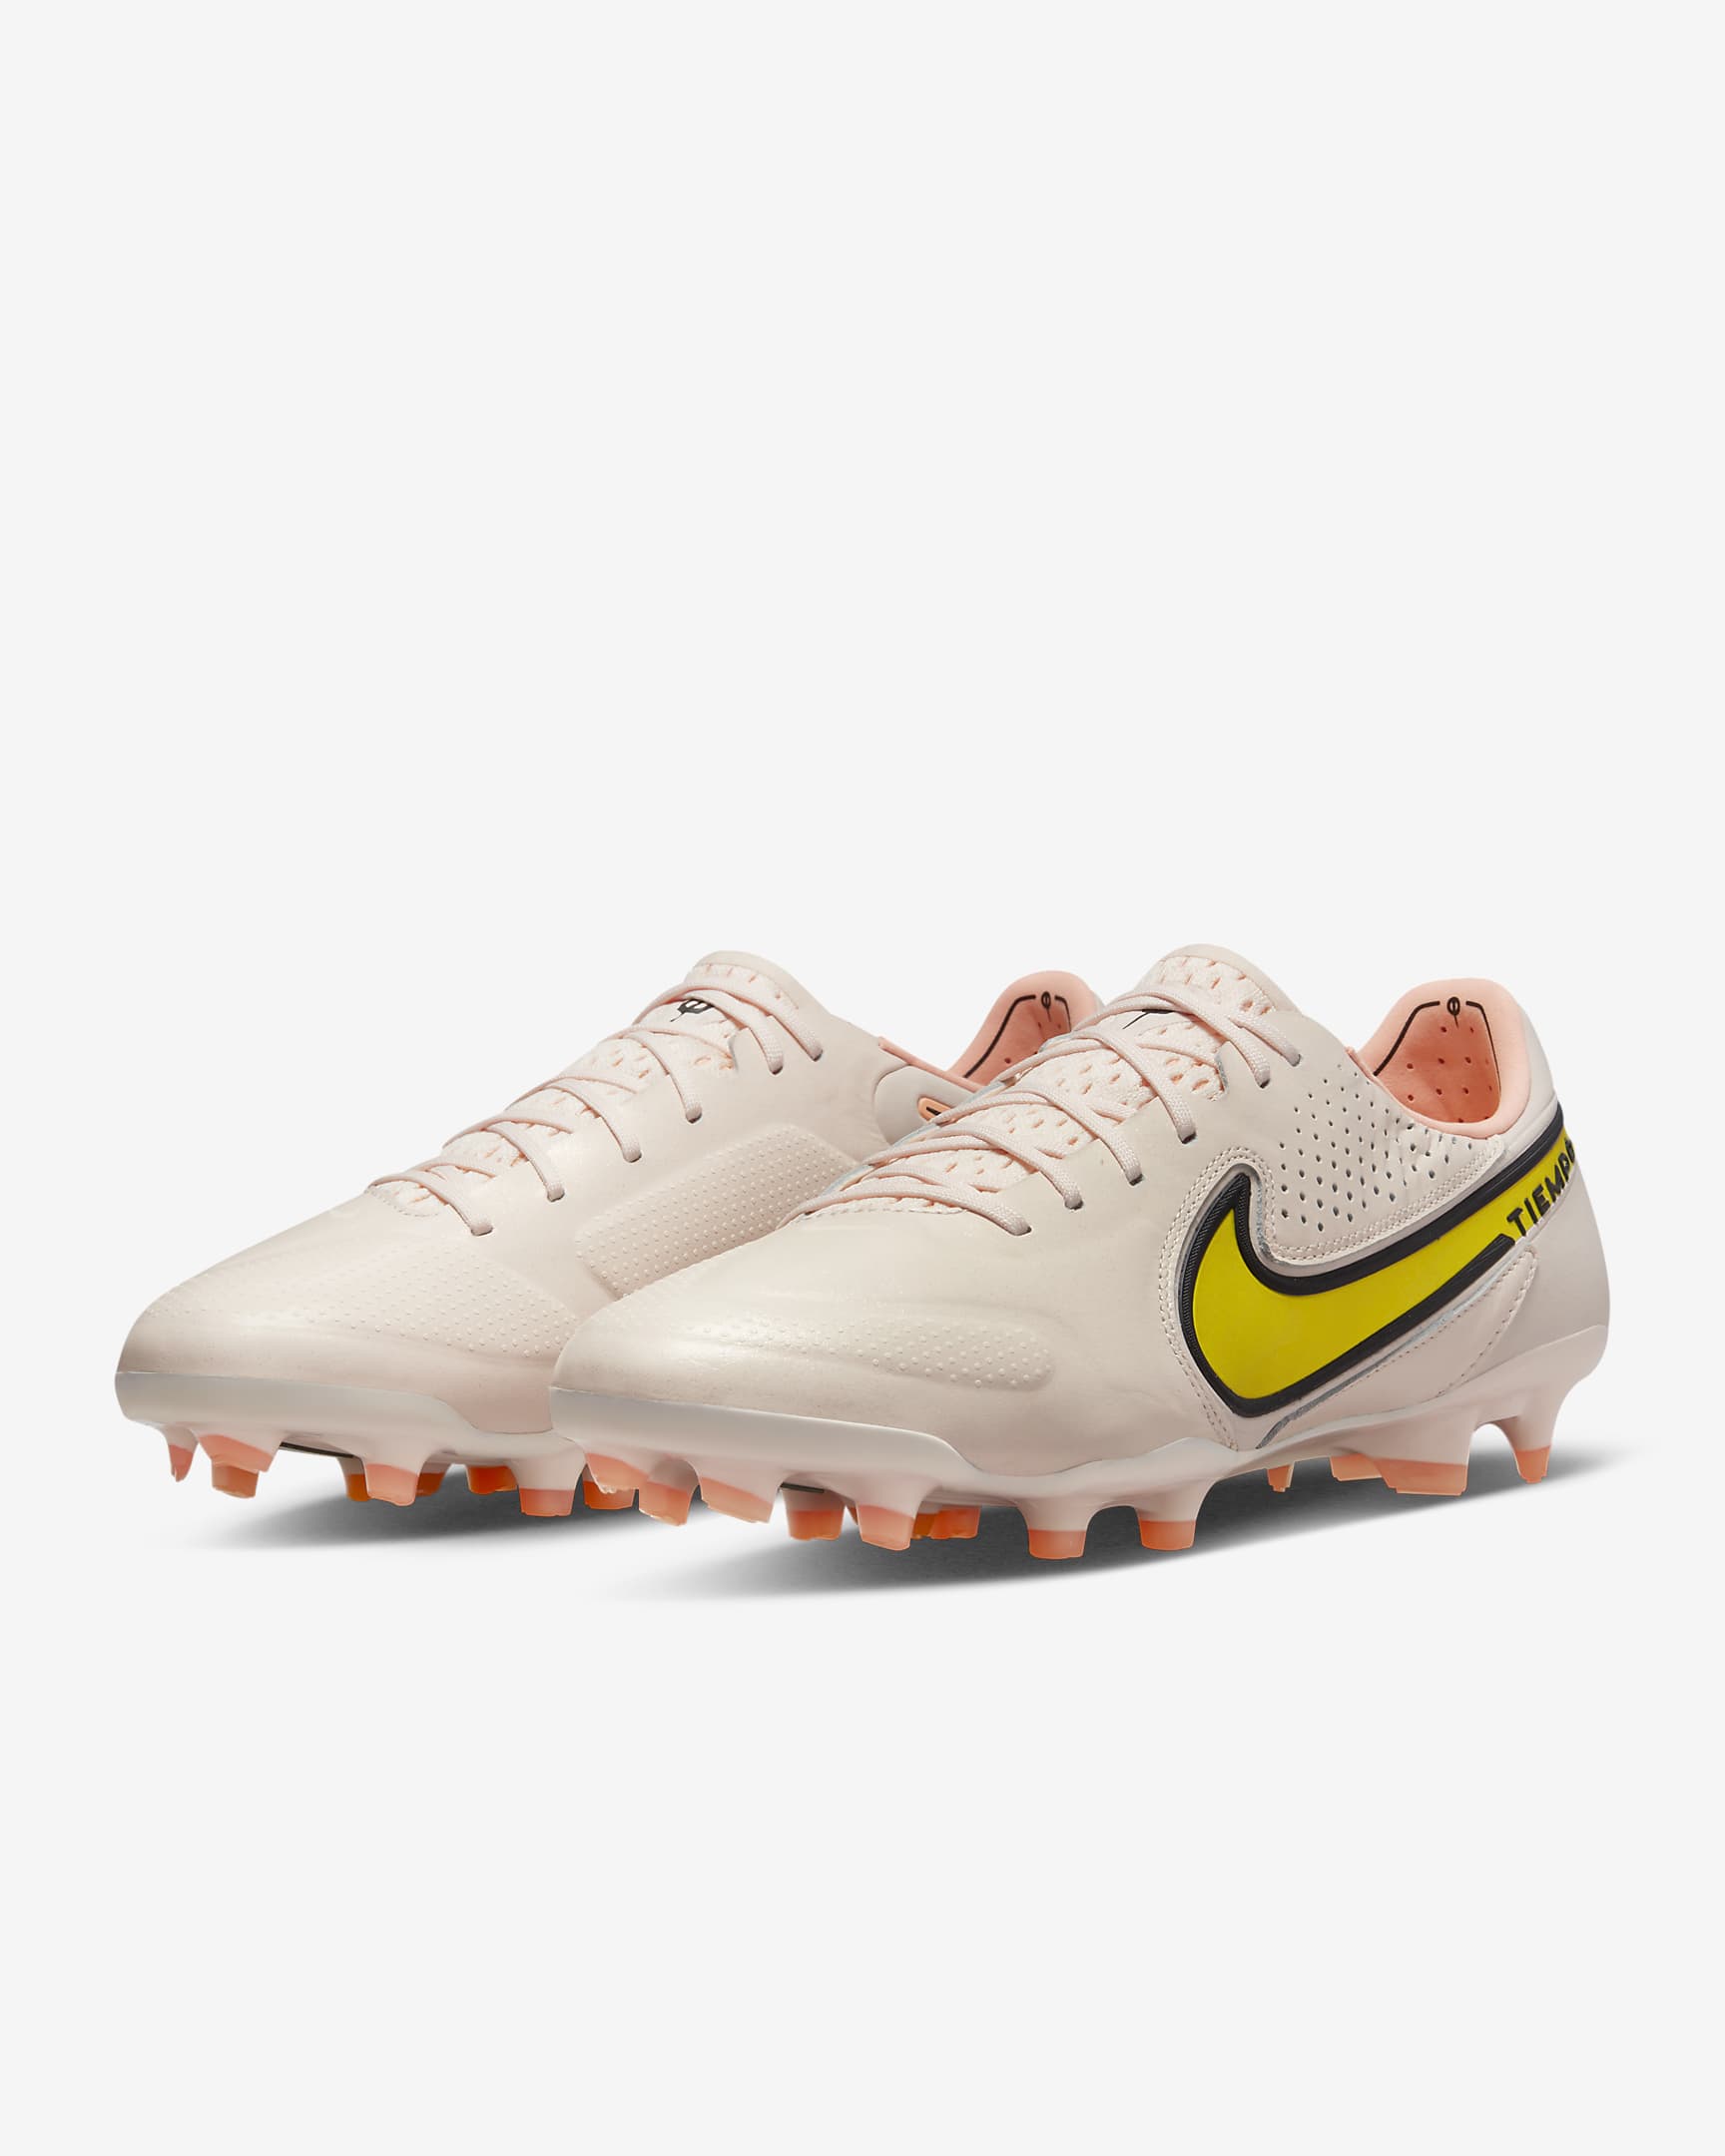 Nike Tiempo Legend 9 Elite FG Firm-Ground Football Boots - Guava Ice/Sunset Glow/Yellow Strike